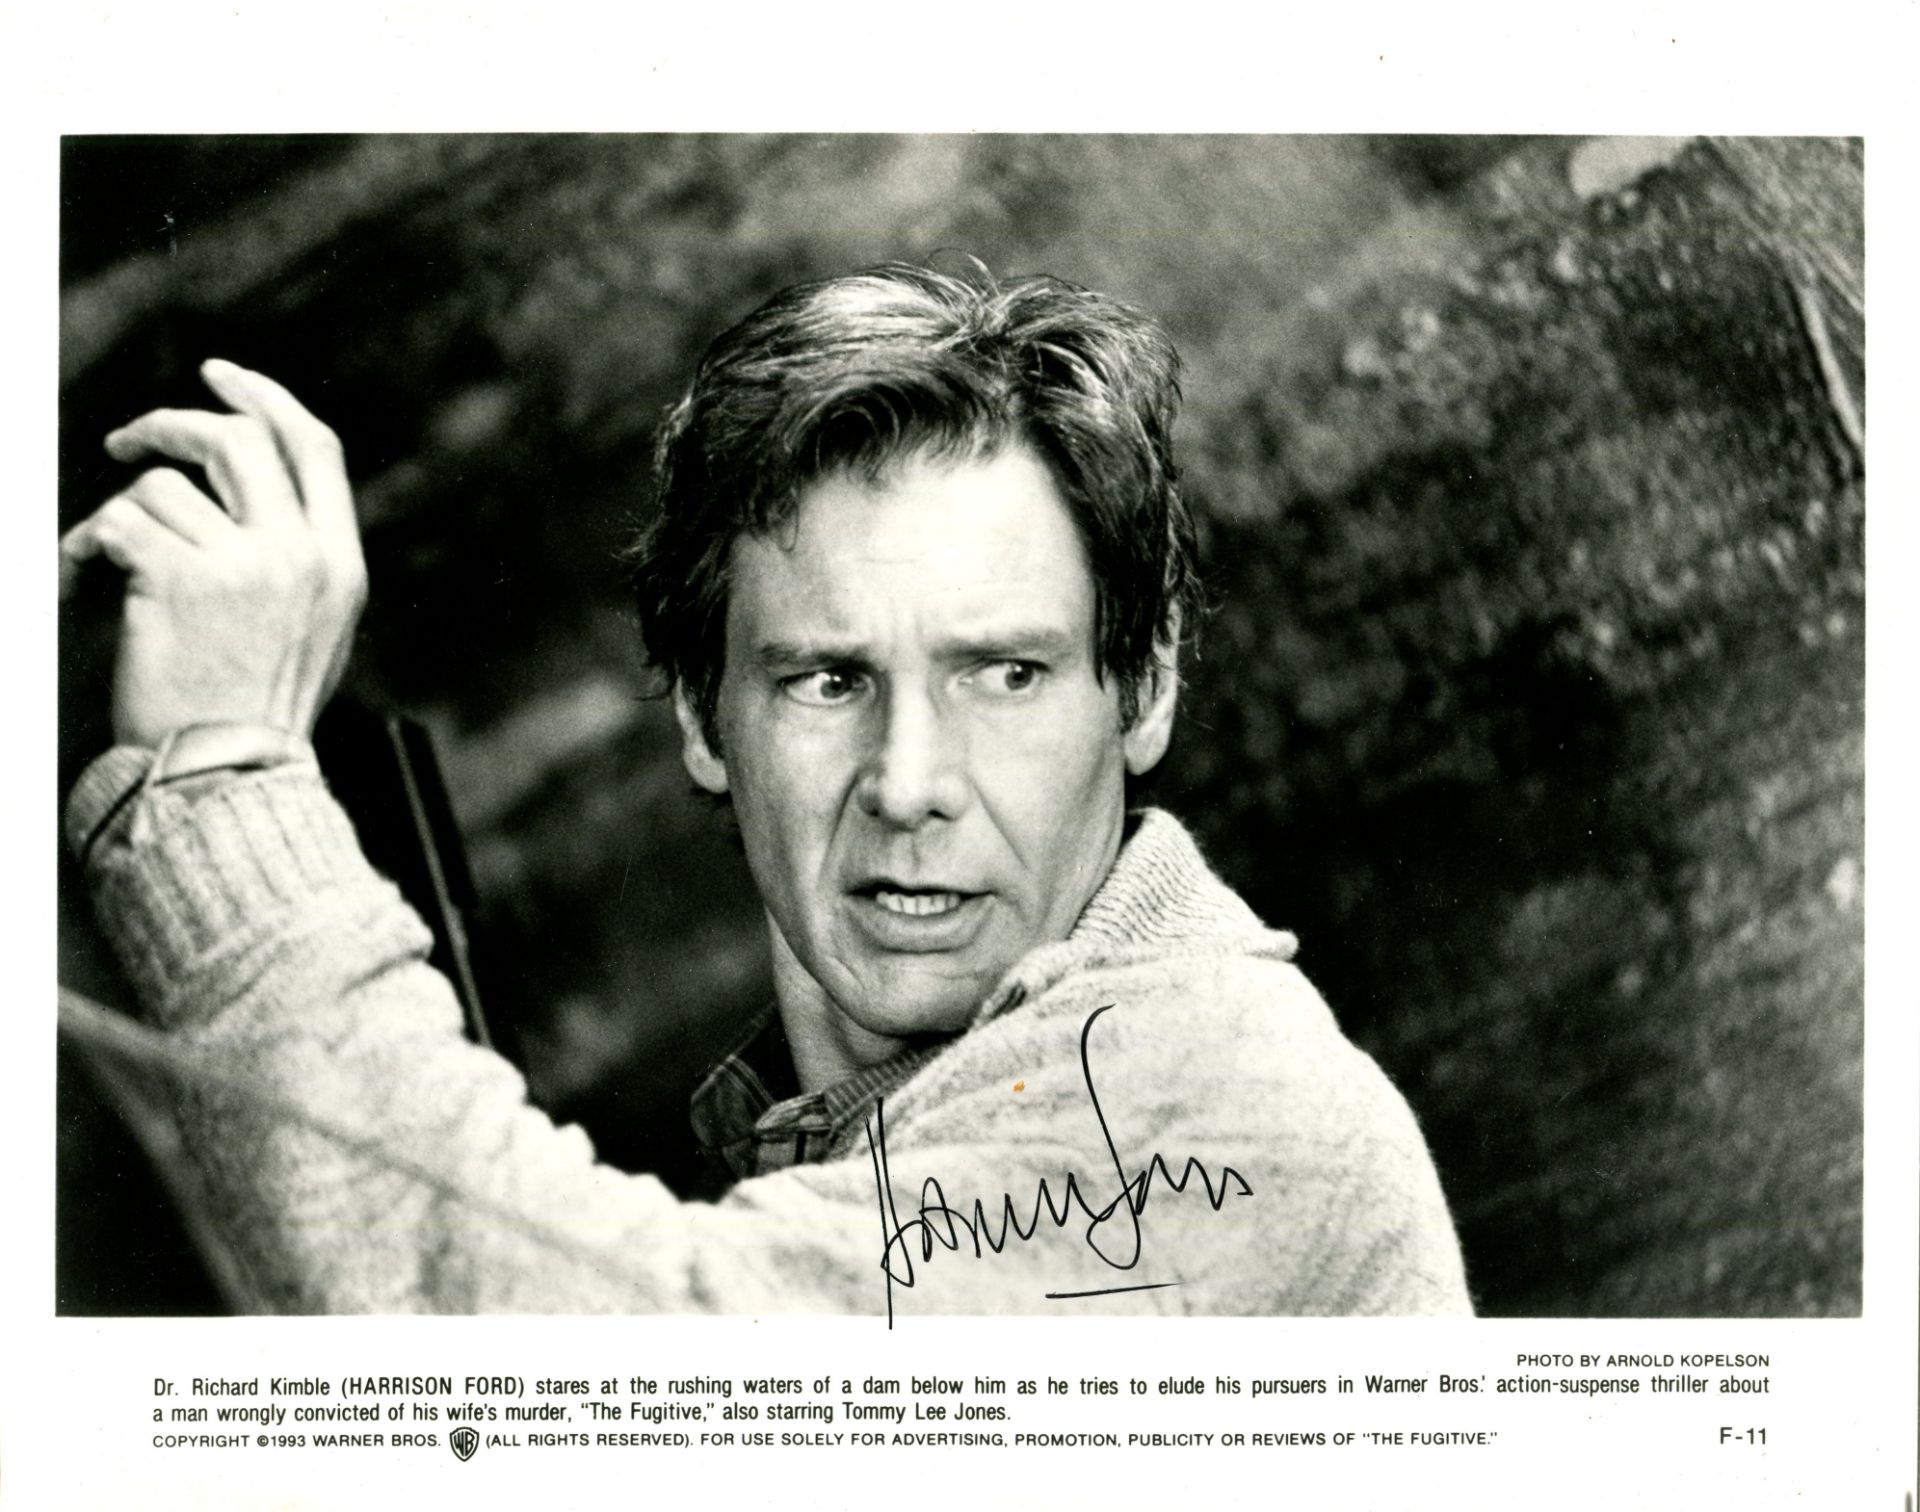 FUGITIVE THE: Harrison Ford (1942- ) American actor. Signed 10 x 8 photograph of Ford in a head